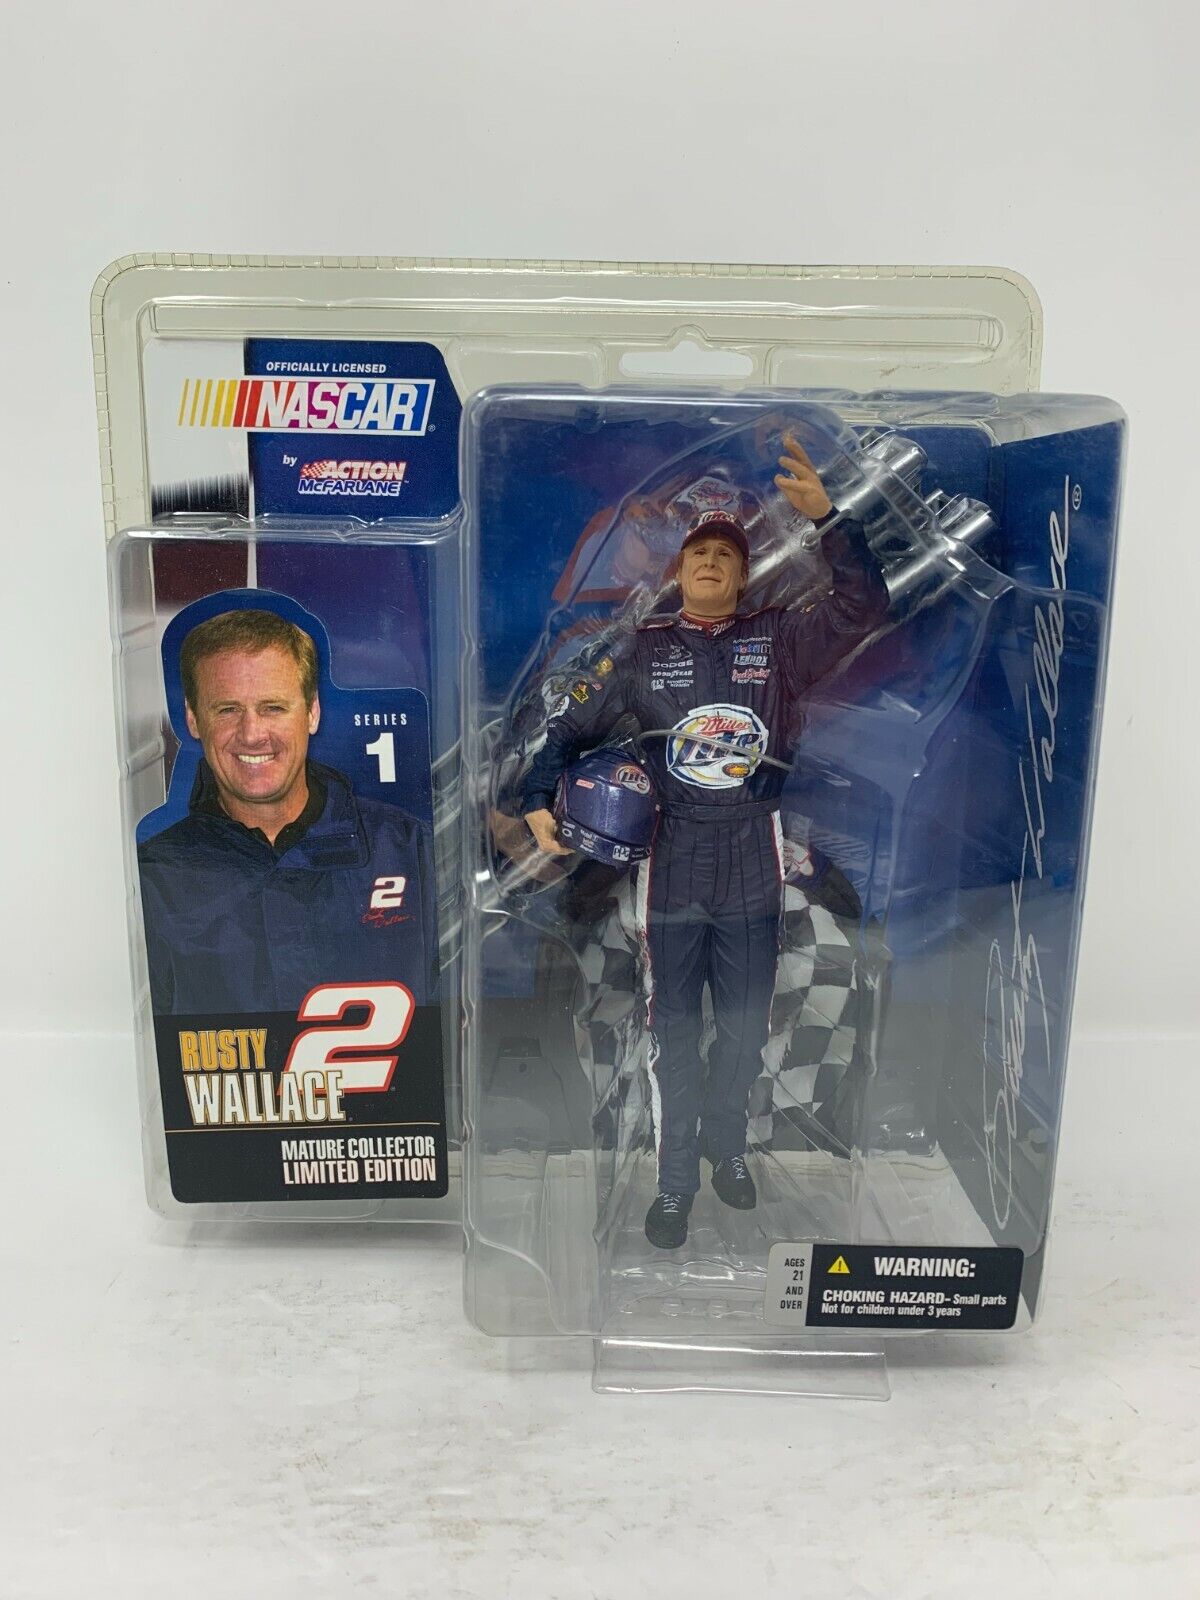 McFarlane Action Nascar Rusty Wallace # 2 Series 1 Limited Edition Figurine